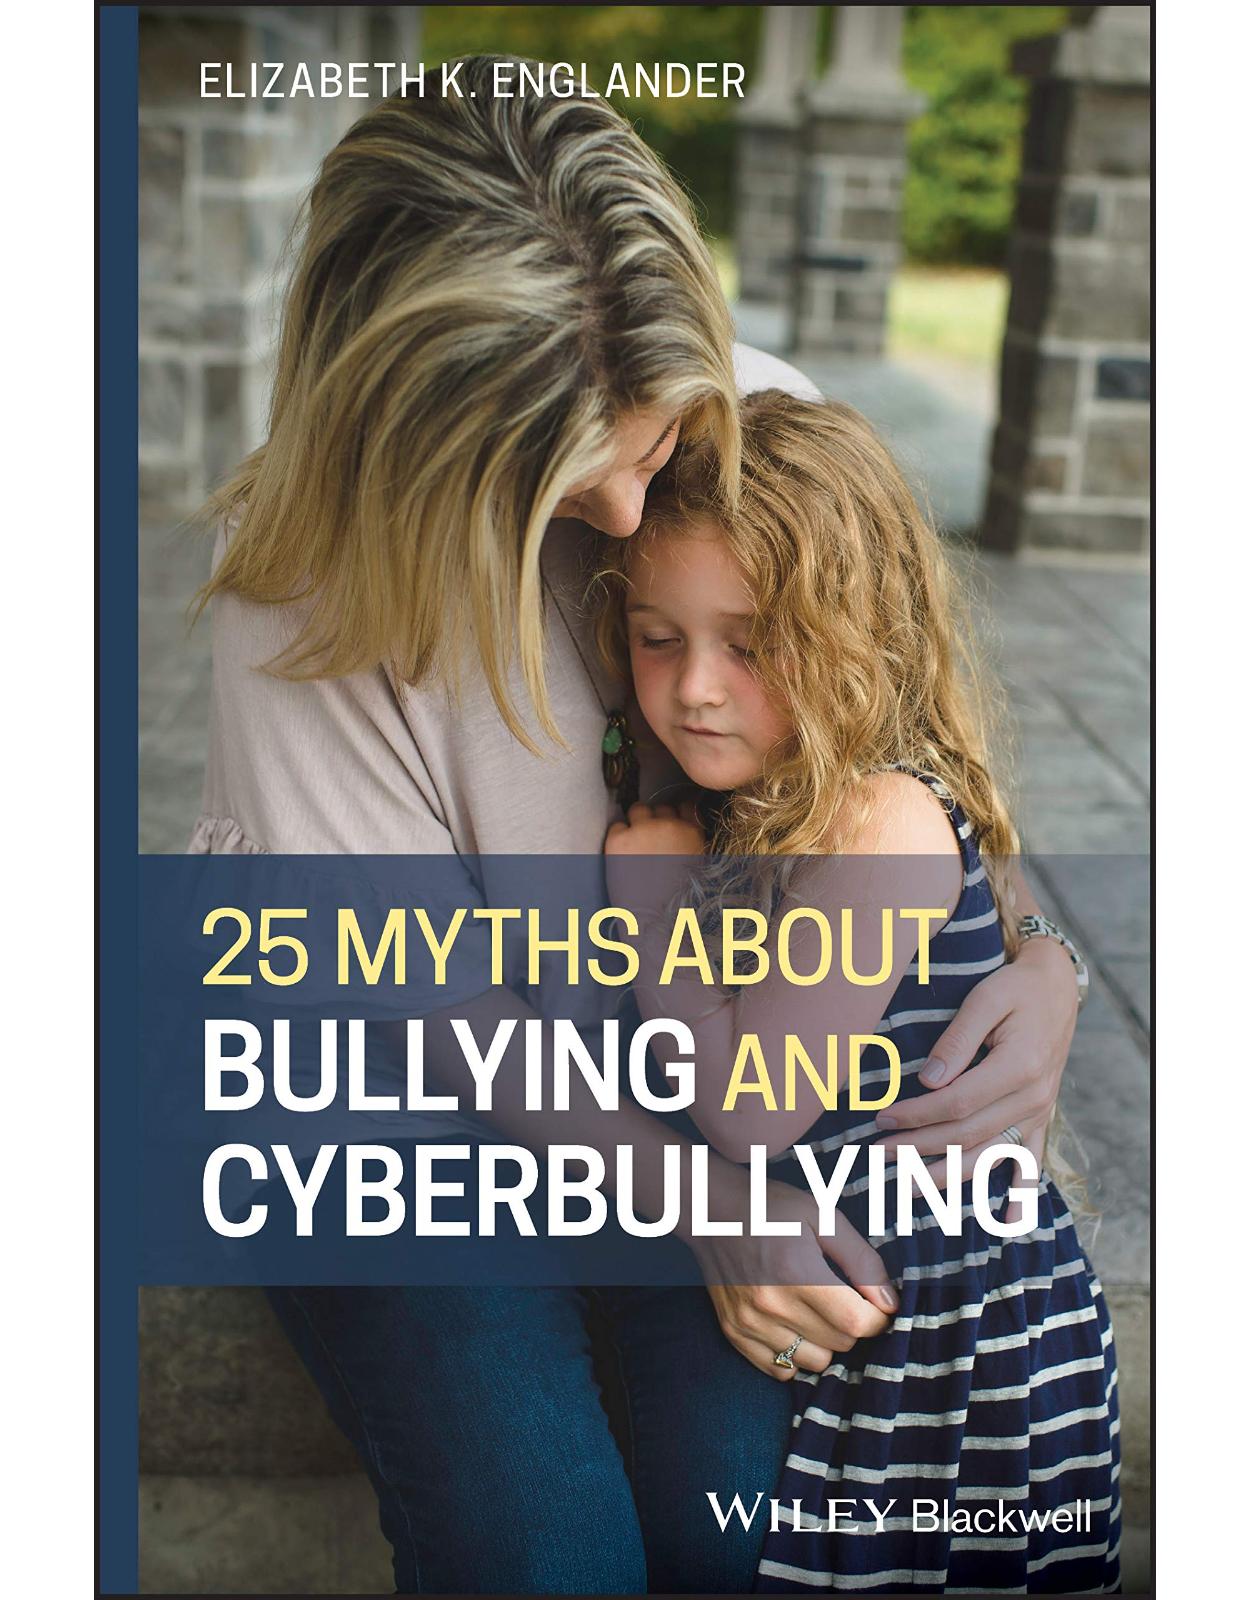 25 Myths about Bullying and Cyberbullying